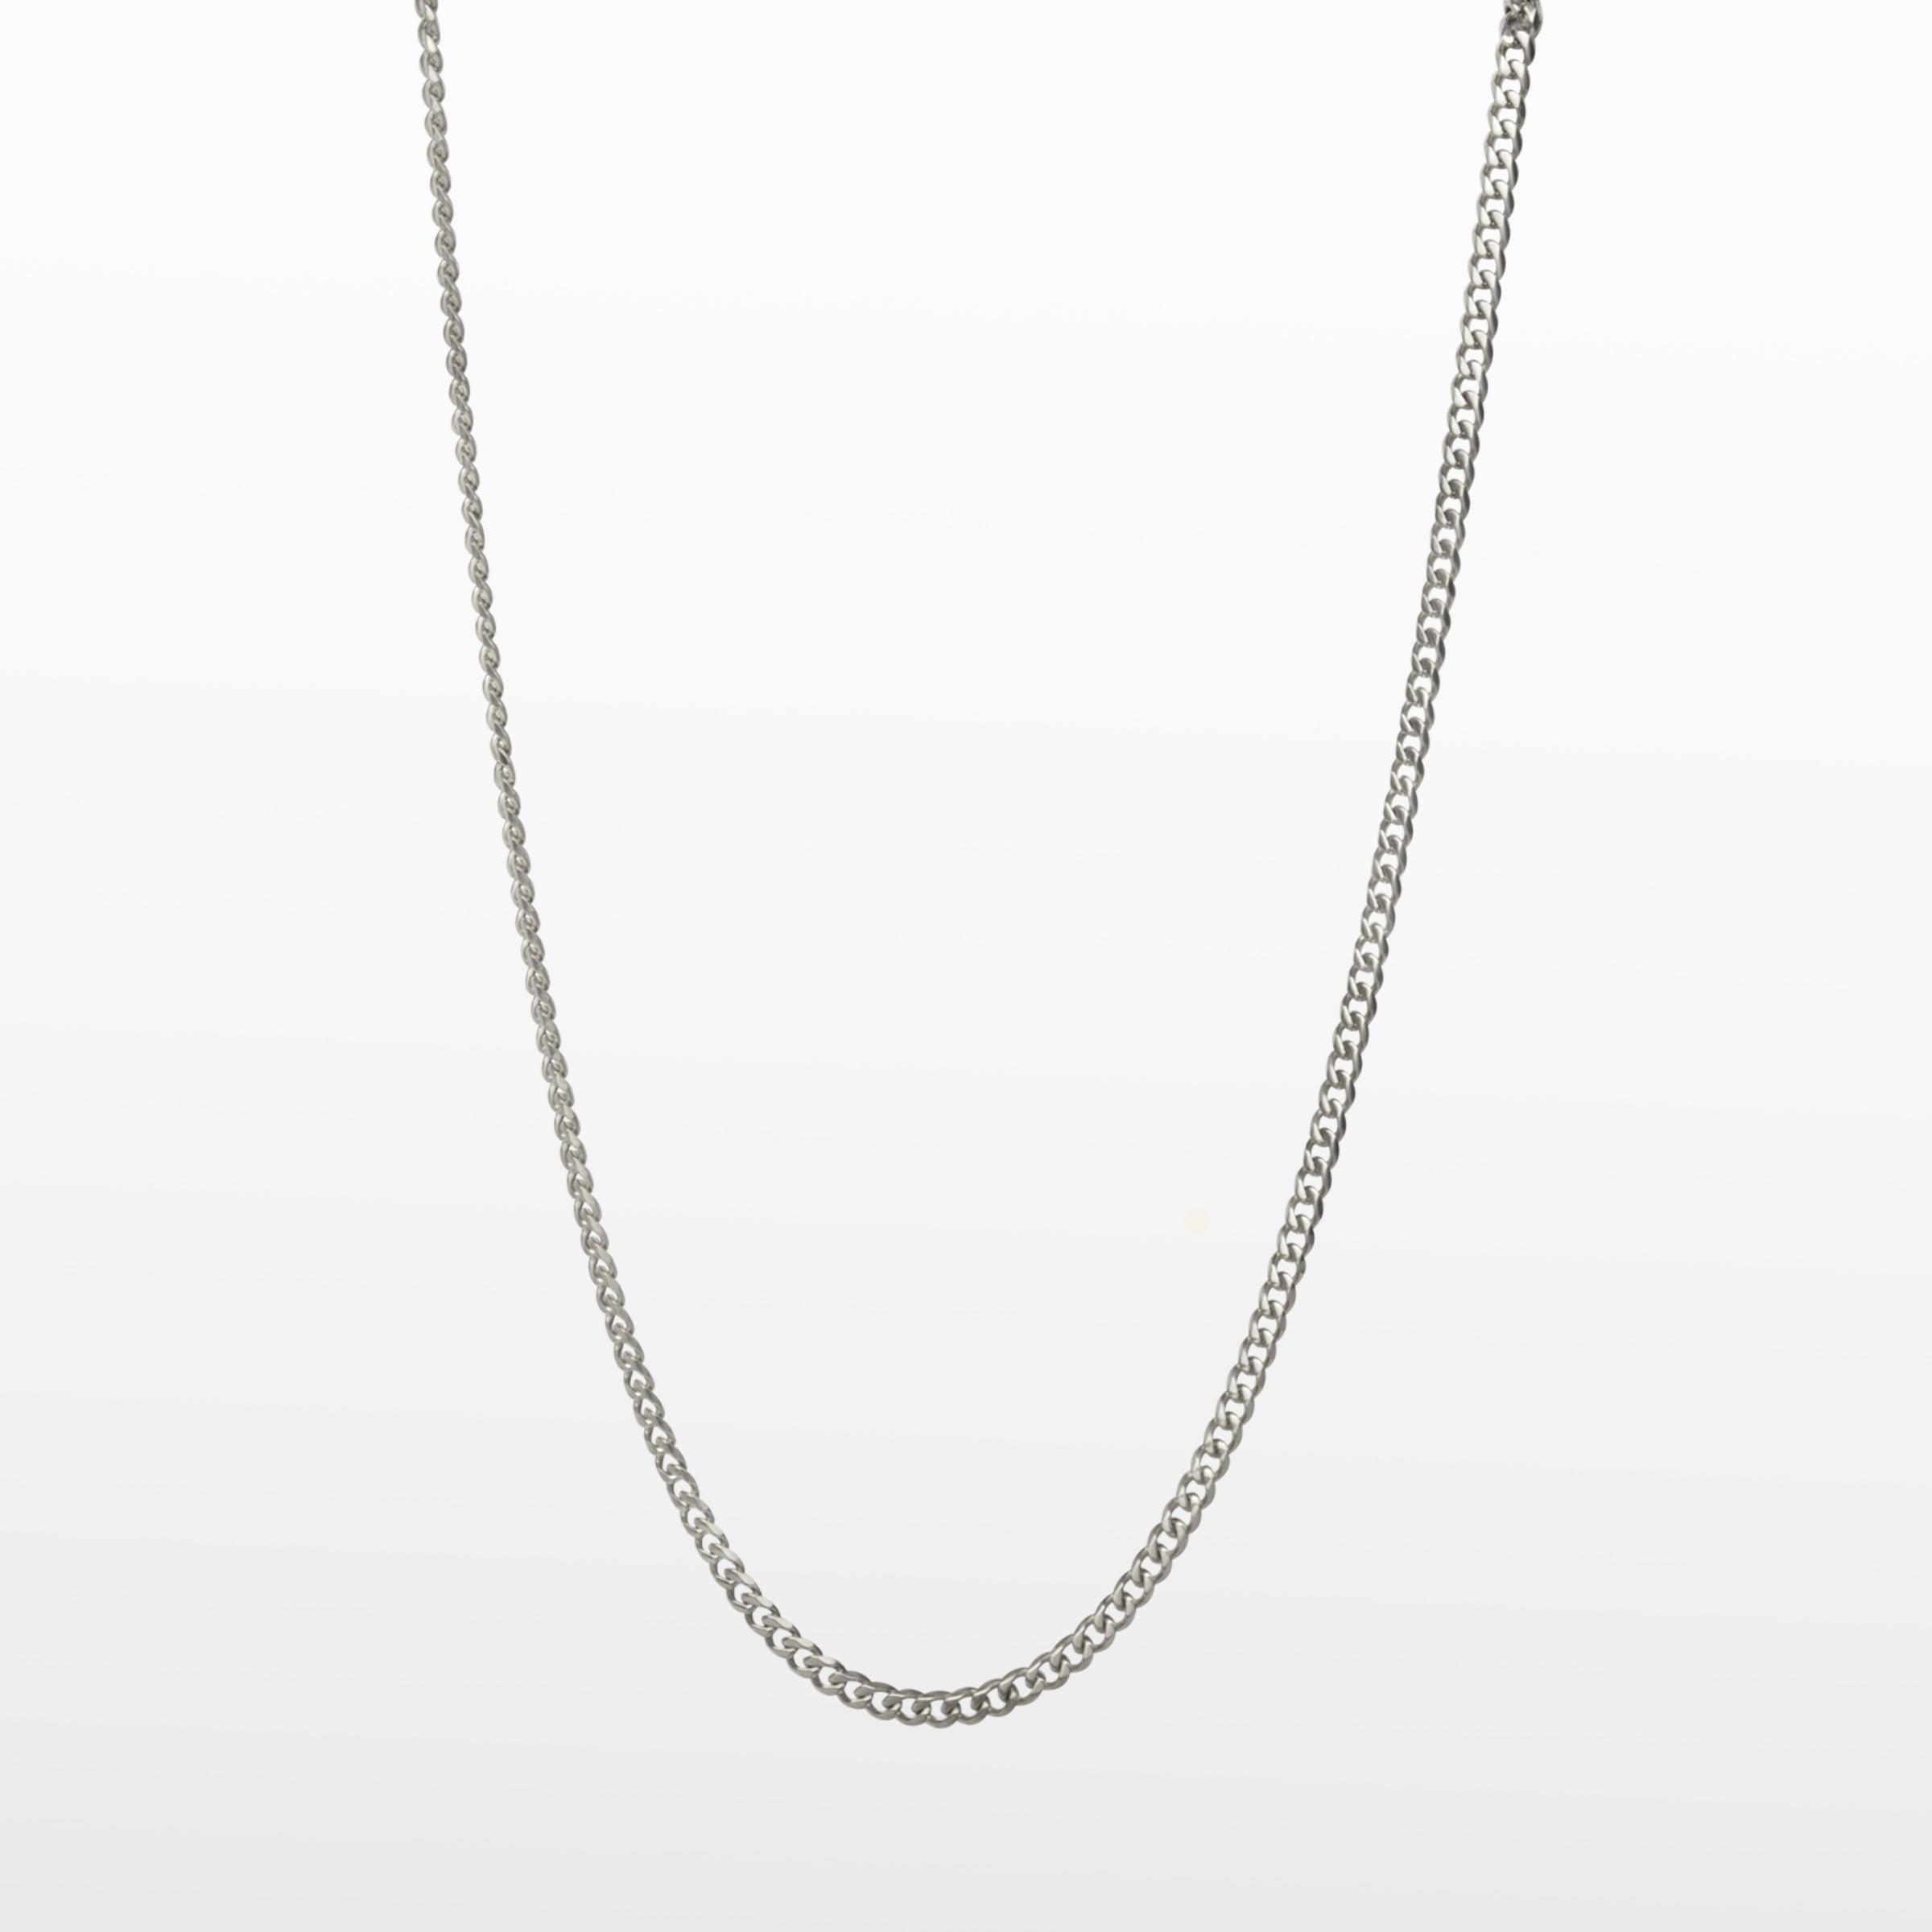 Image of the Cuban Chain in Silver is crafted from Stainless Steel material and is non-tarnish, water-resistant, and designed to be hypoallergenic.